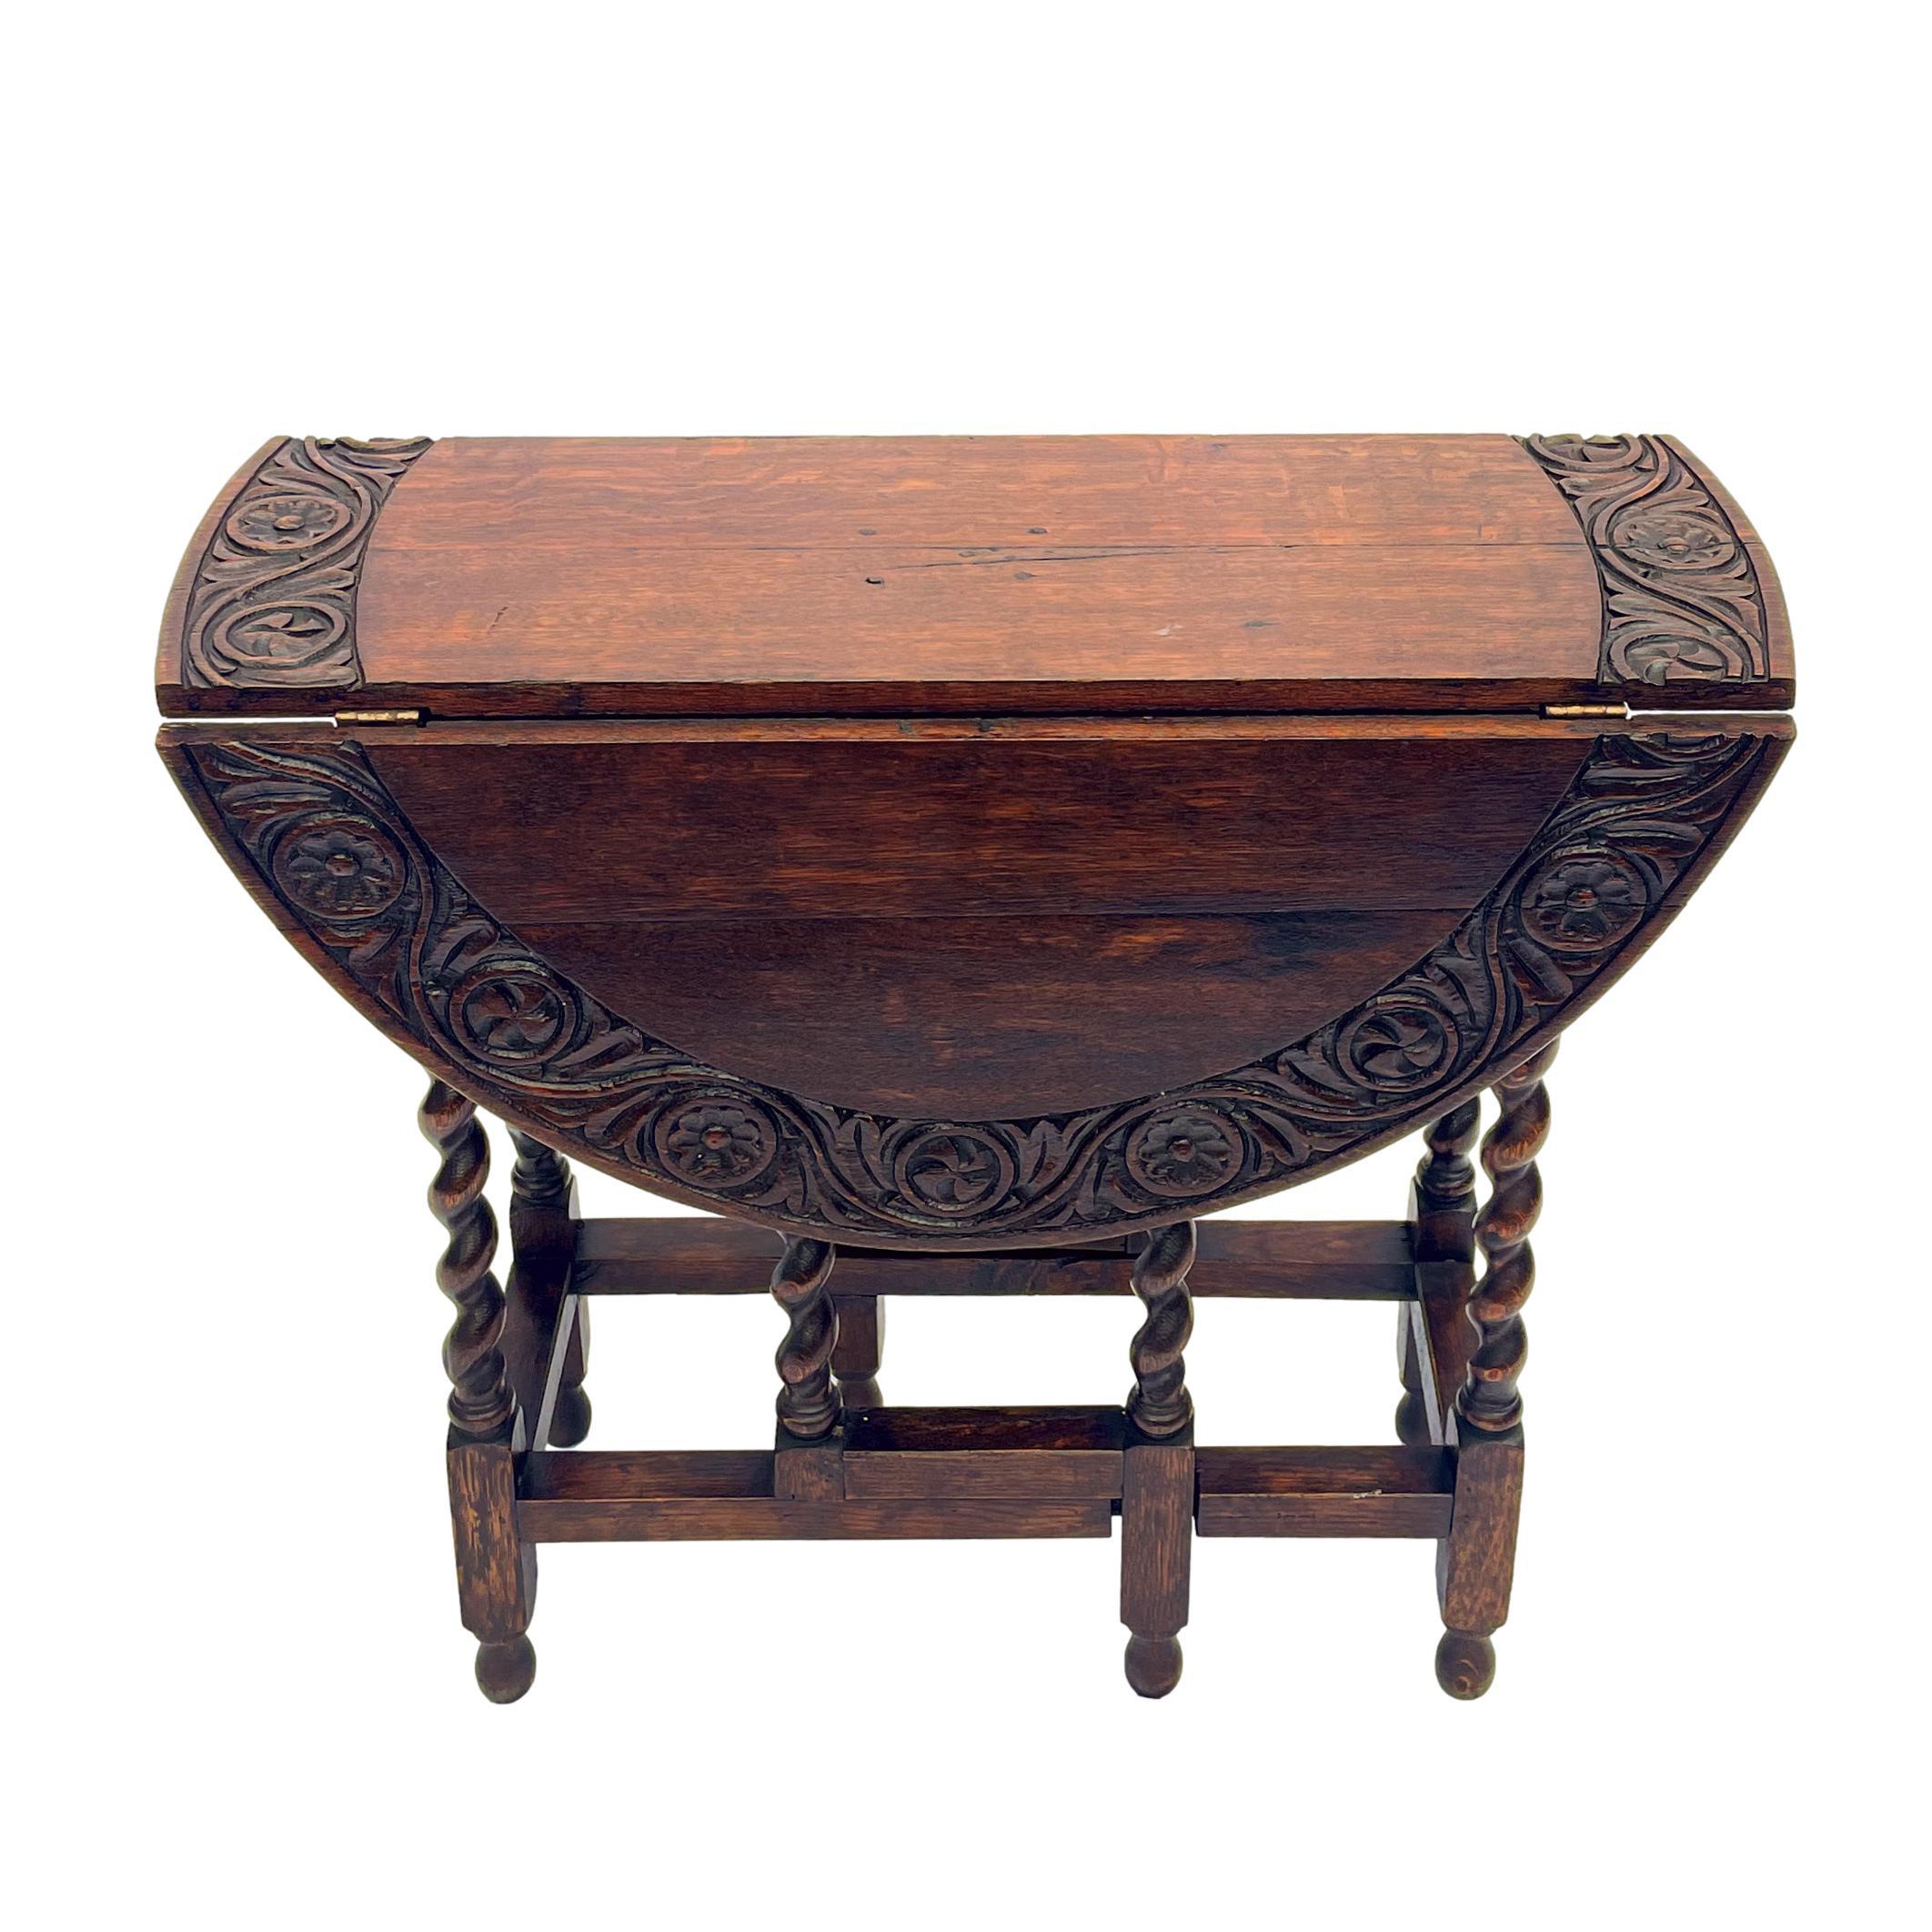 Solid oak drop-leaf table with a hand-carved stylized leaf and floral band to the top, the gateleg base with barley twist legs, English, circa 1900.
Measurements Closed: H-29 x W-42 x D-20 ins.
Measurements Open: Height-29 x diameter-68 ins.